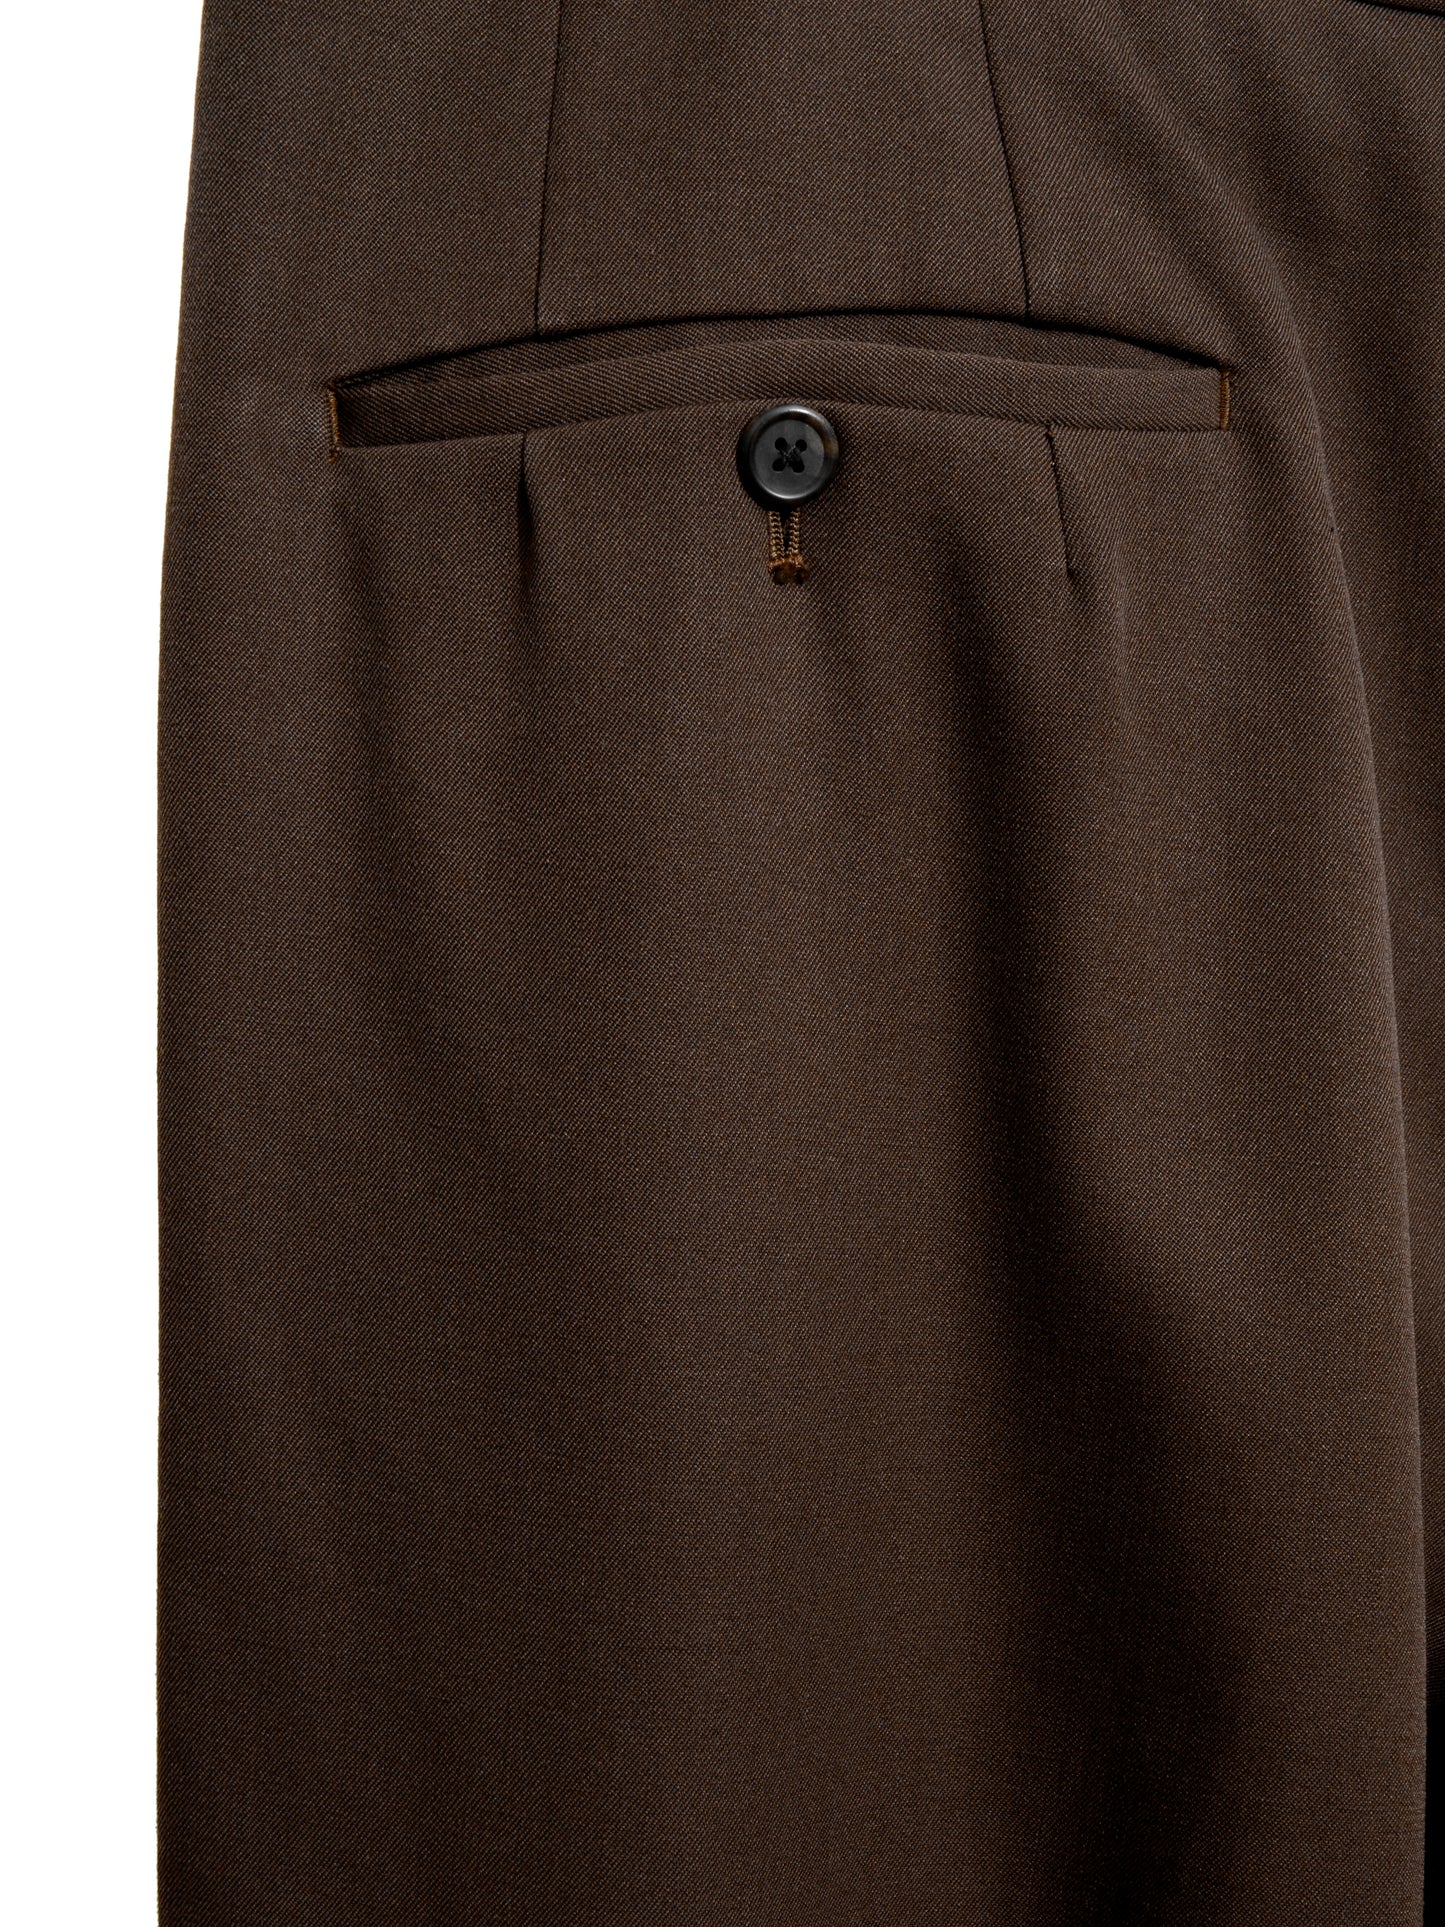 wide trousers chocolate ∙ wool ∙ large